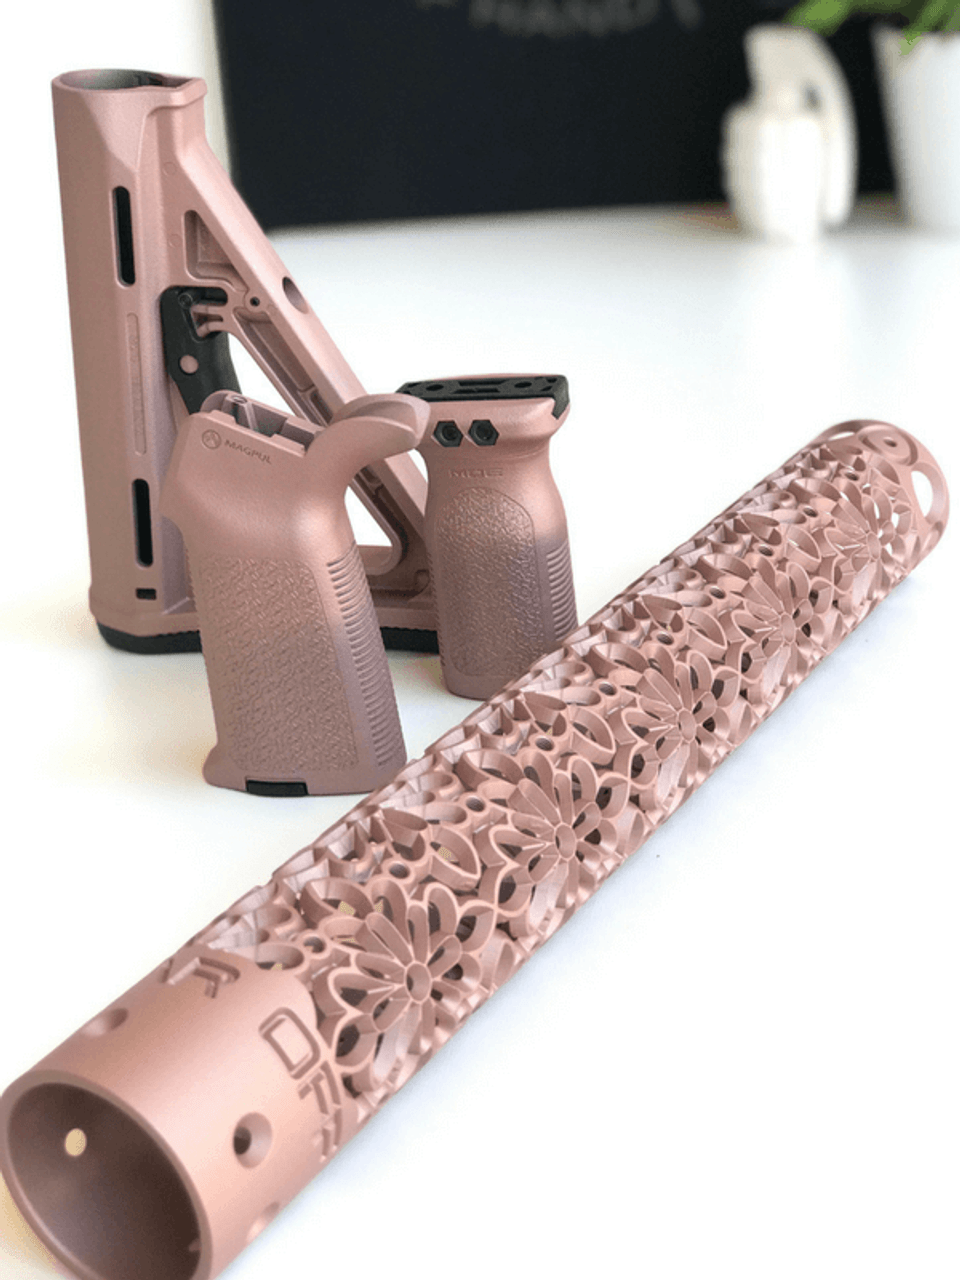 Ar15 Hand Guard Rail With Lotus Wood Carving Design